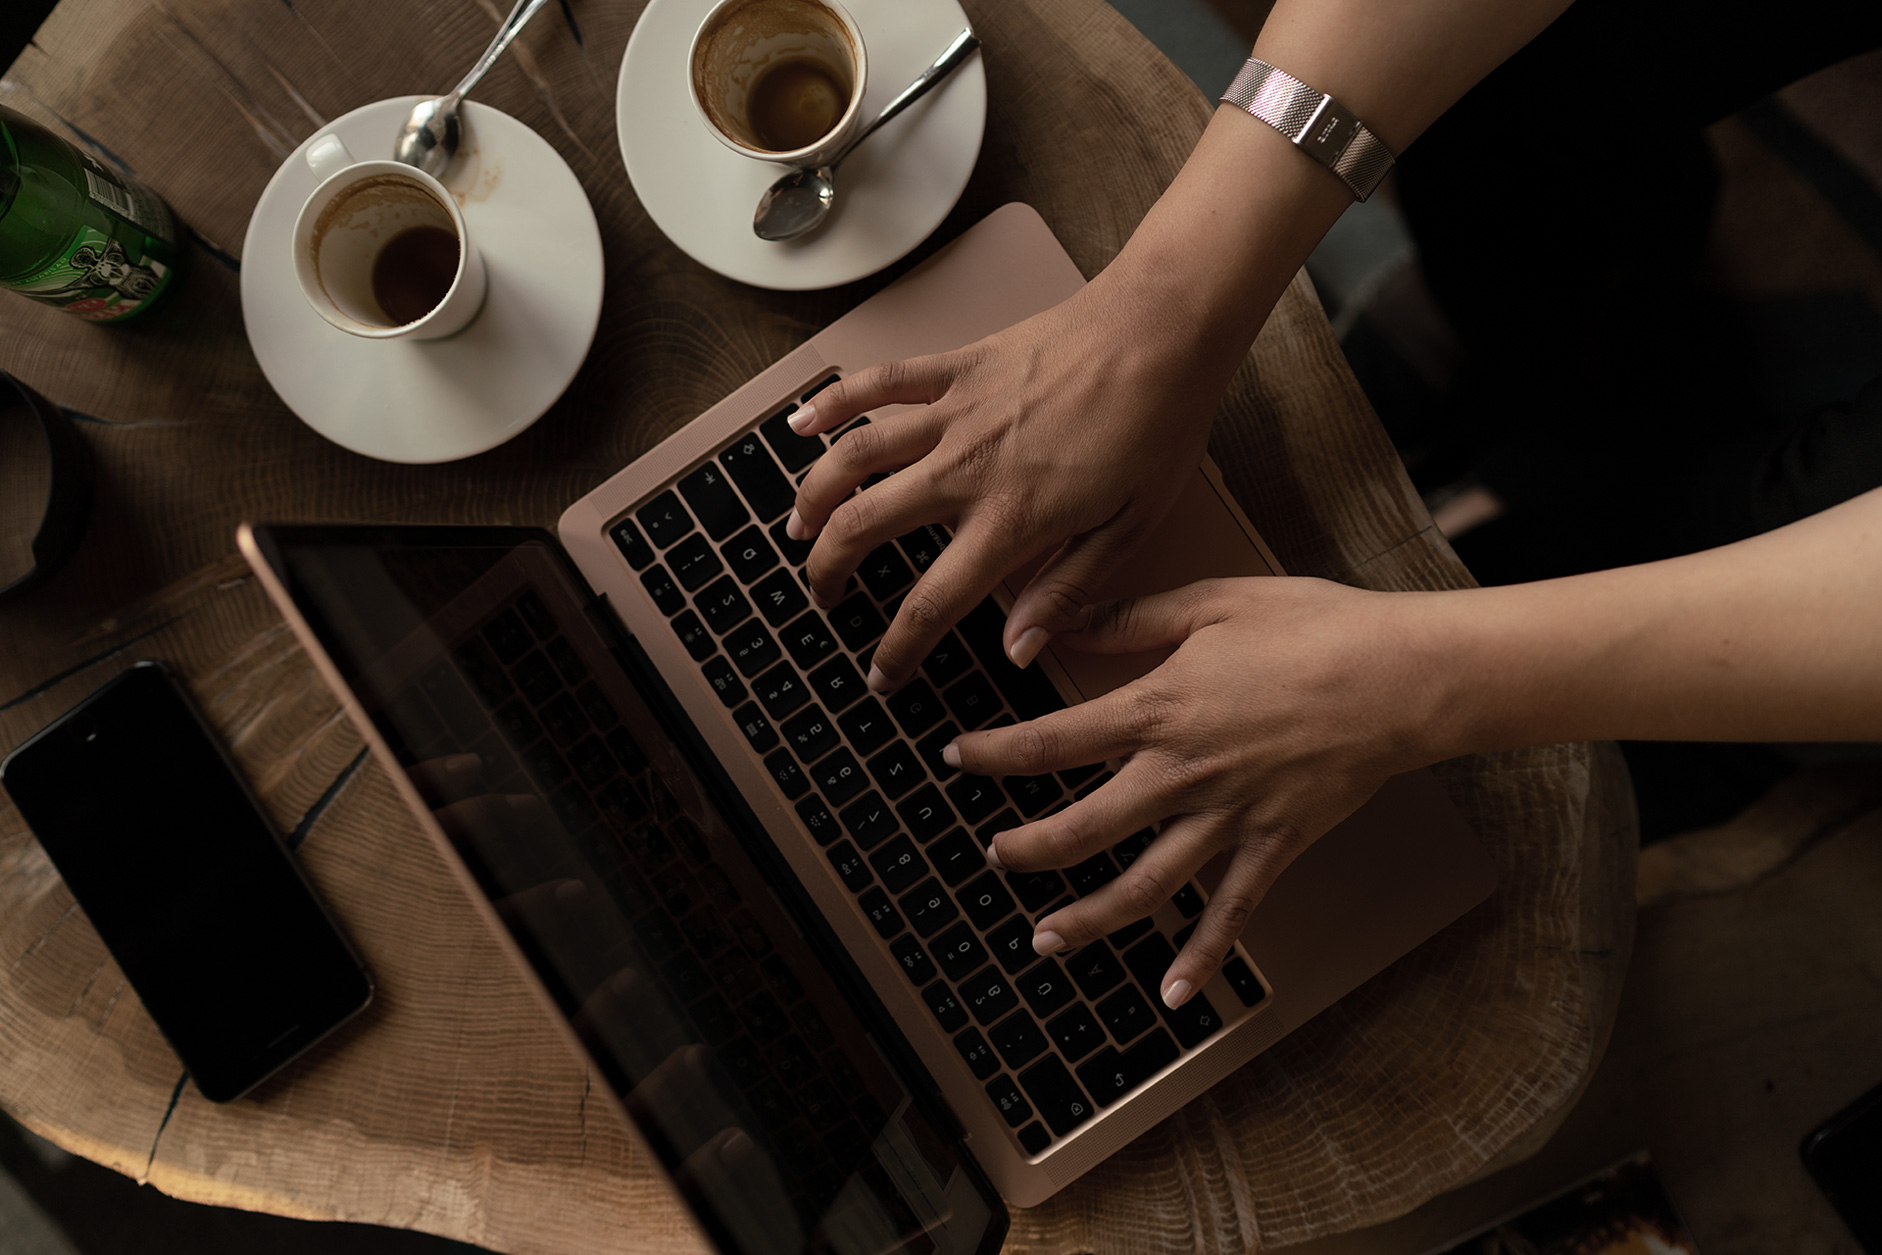 the-woman-s-hands-on-the-laptop-and-coffee-cups-ne.jpg